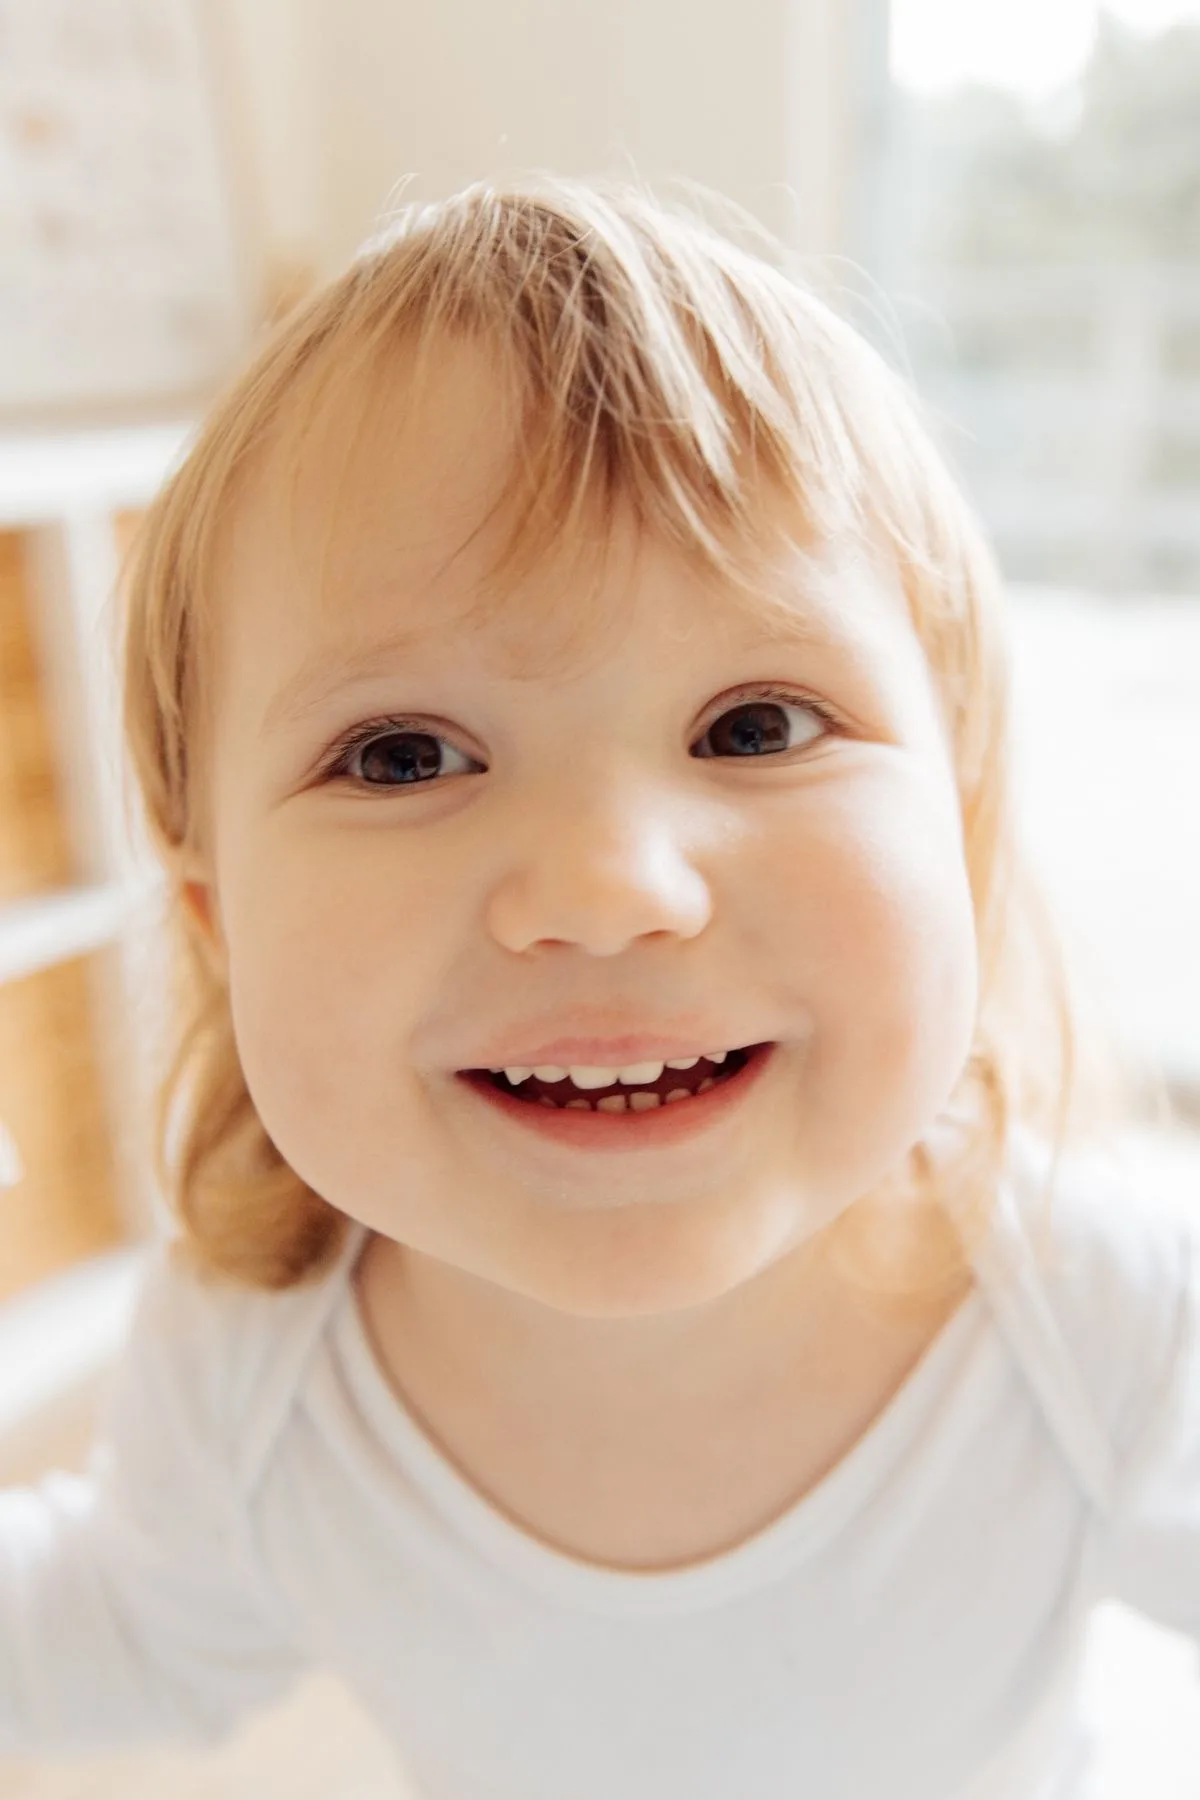 Close up photo of blonde girl with brown eyes wearing a white onesie and smiling.